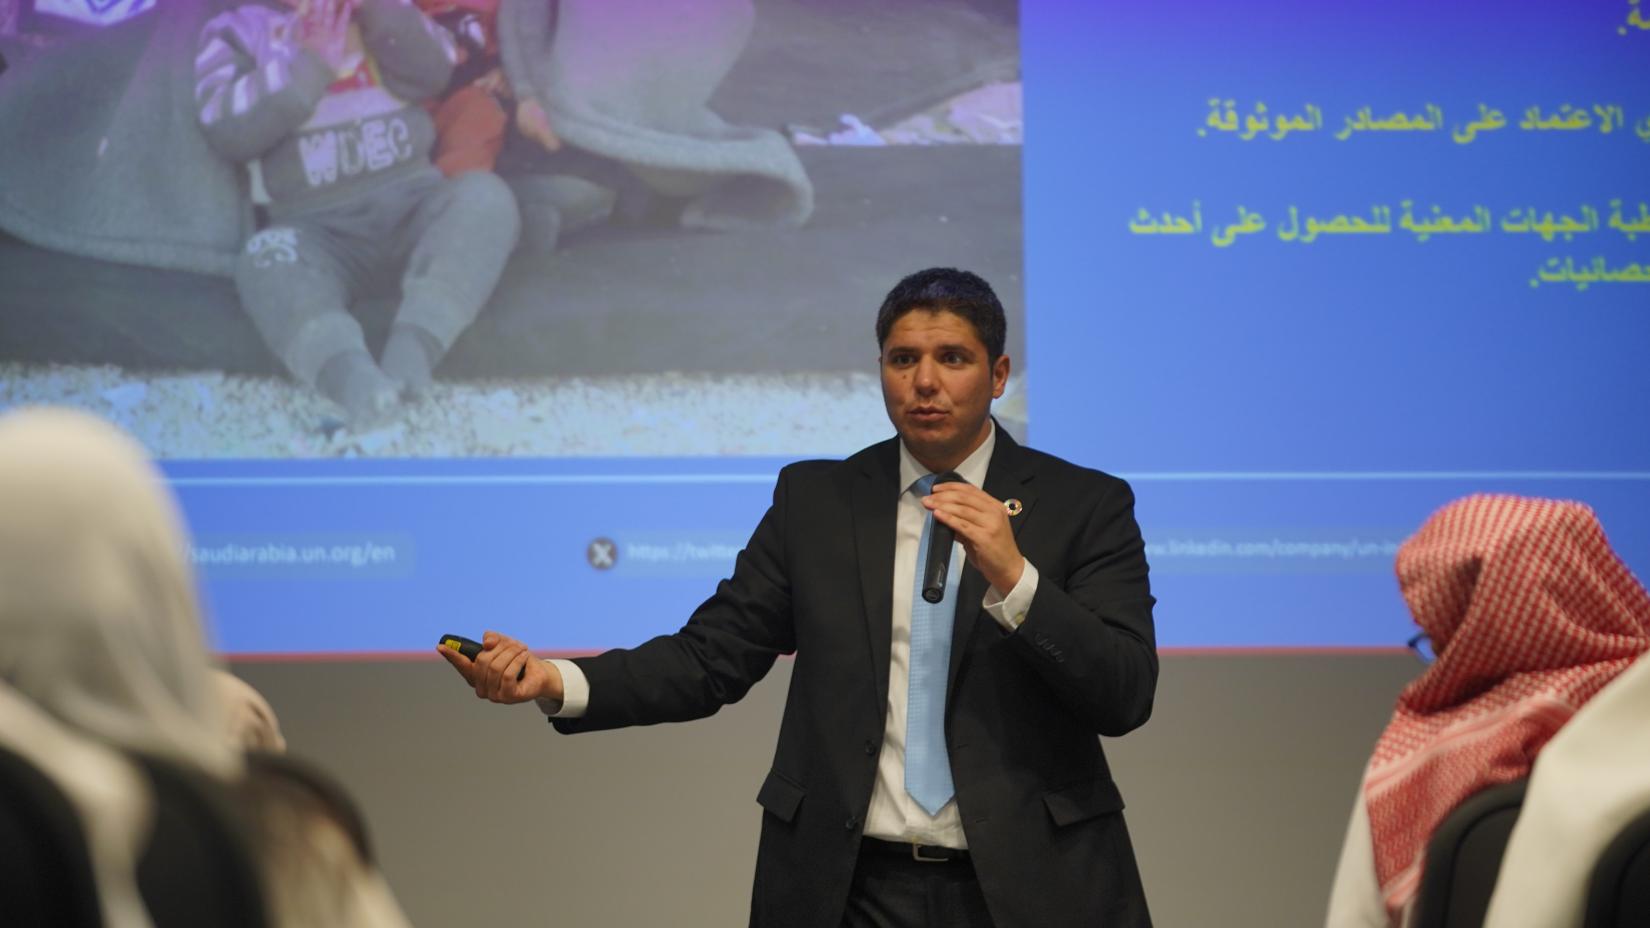 Khaled Kabbara, UNHCR Communication Officer during UNHCR humanitarian story-telling session